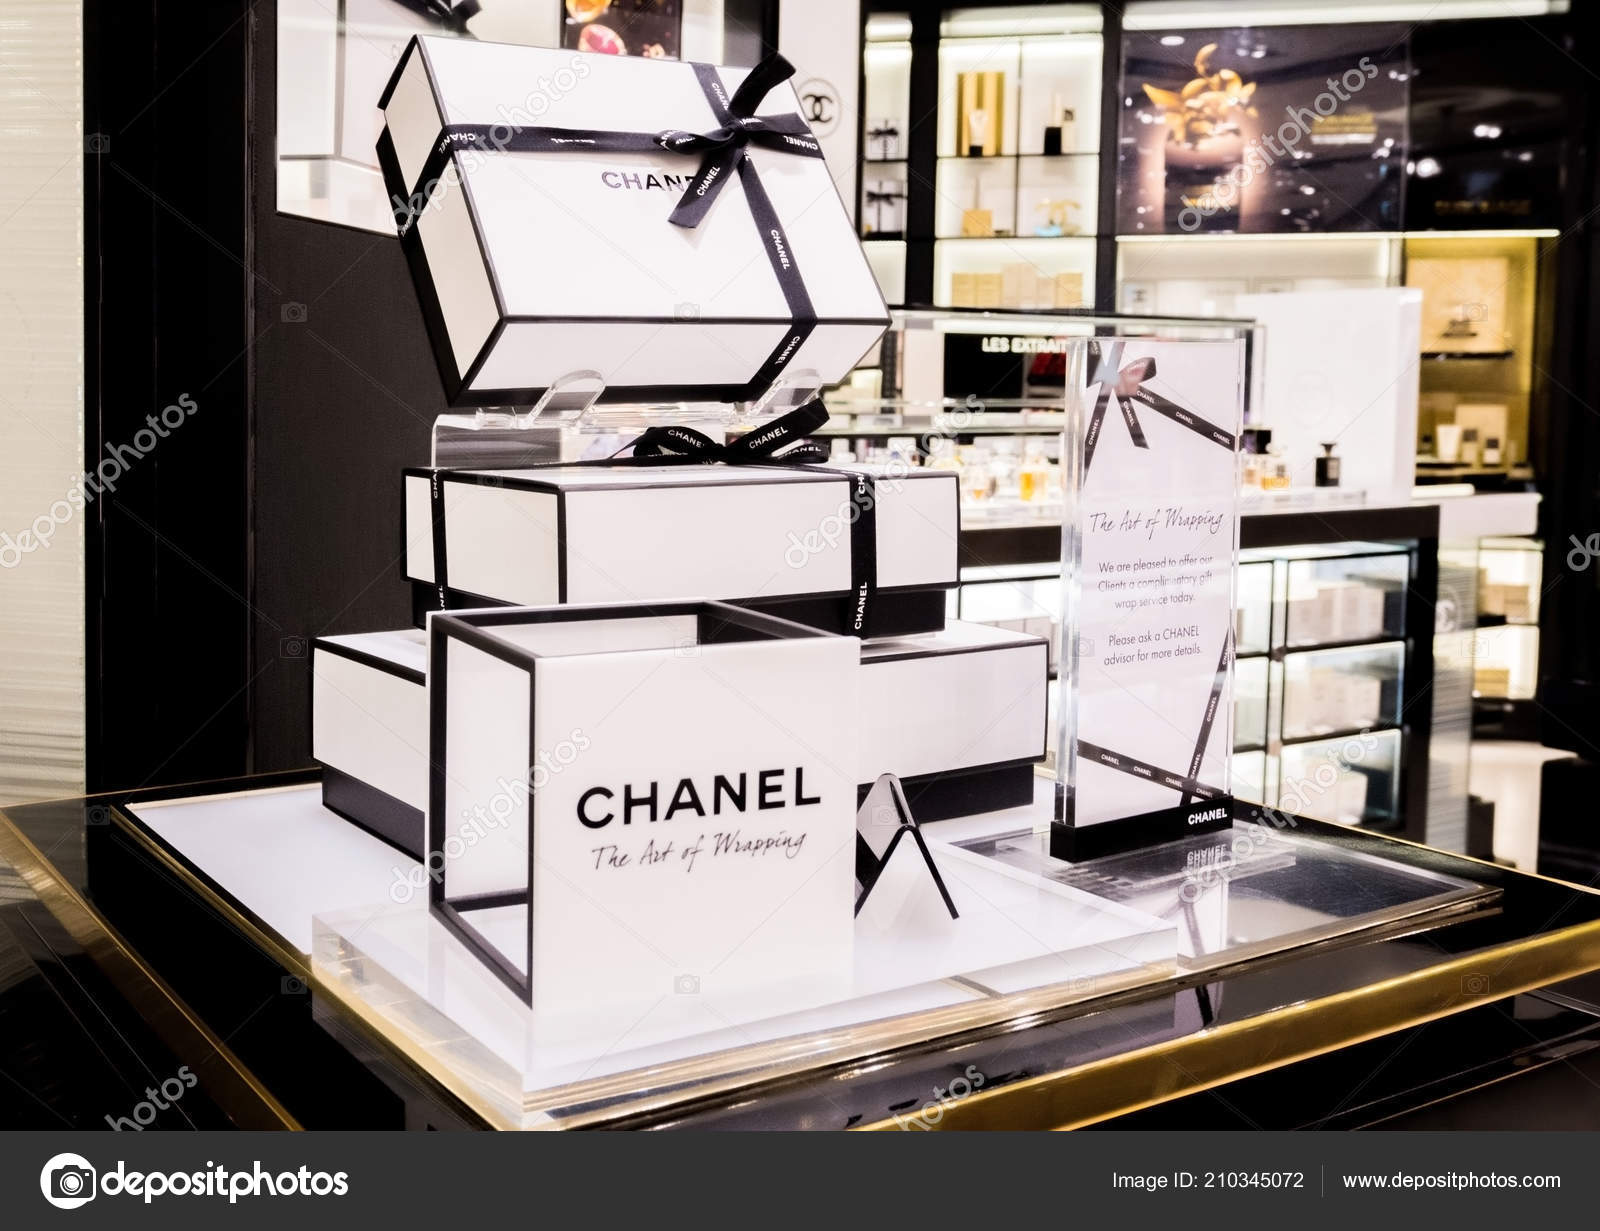 chanel perfume by production paradise, still life photography